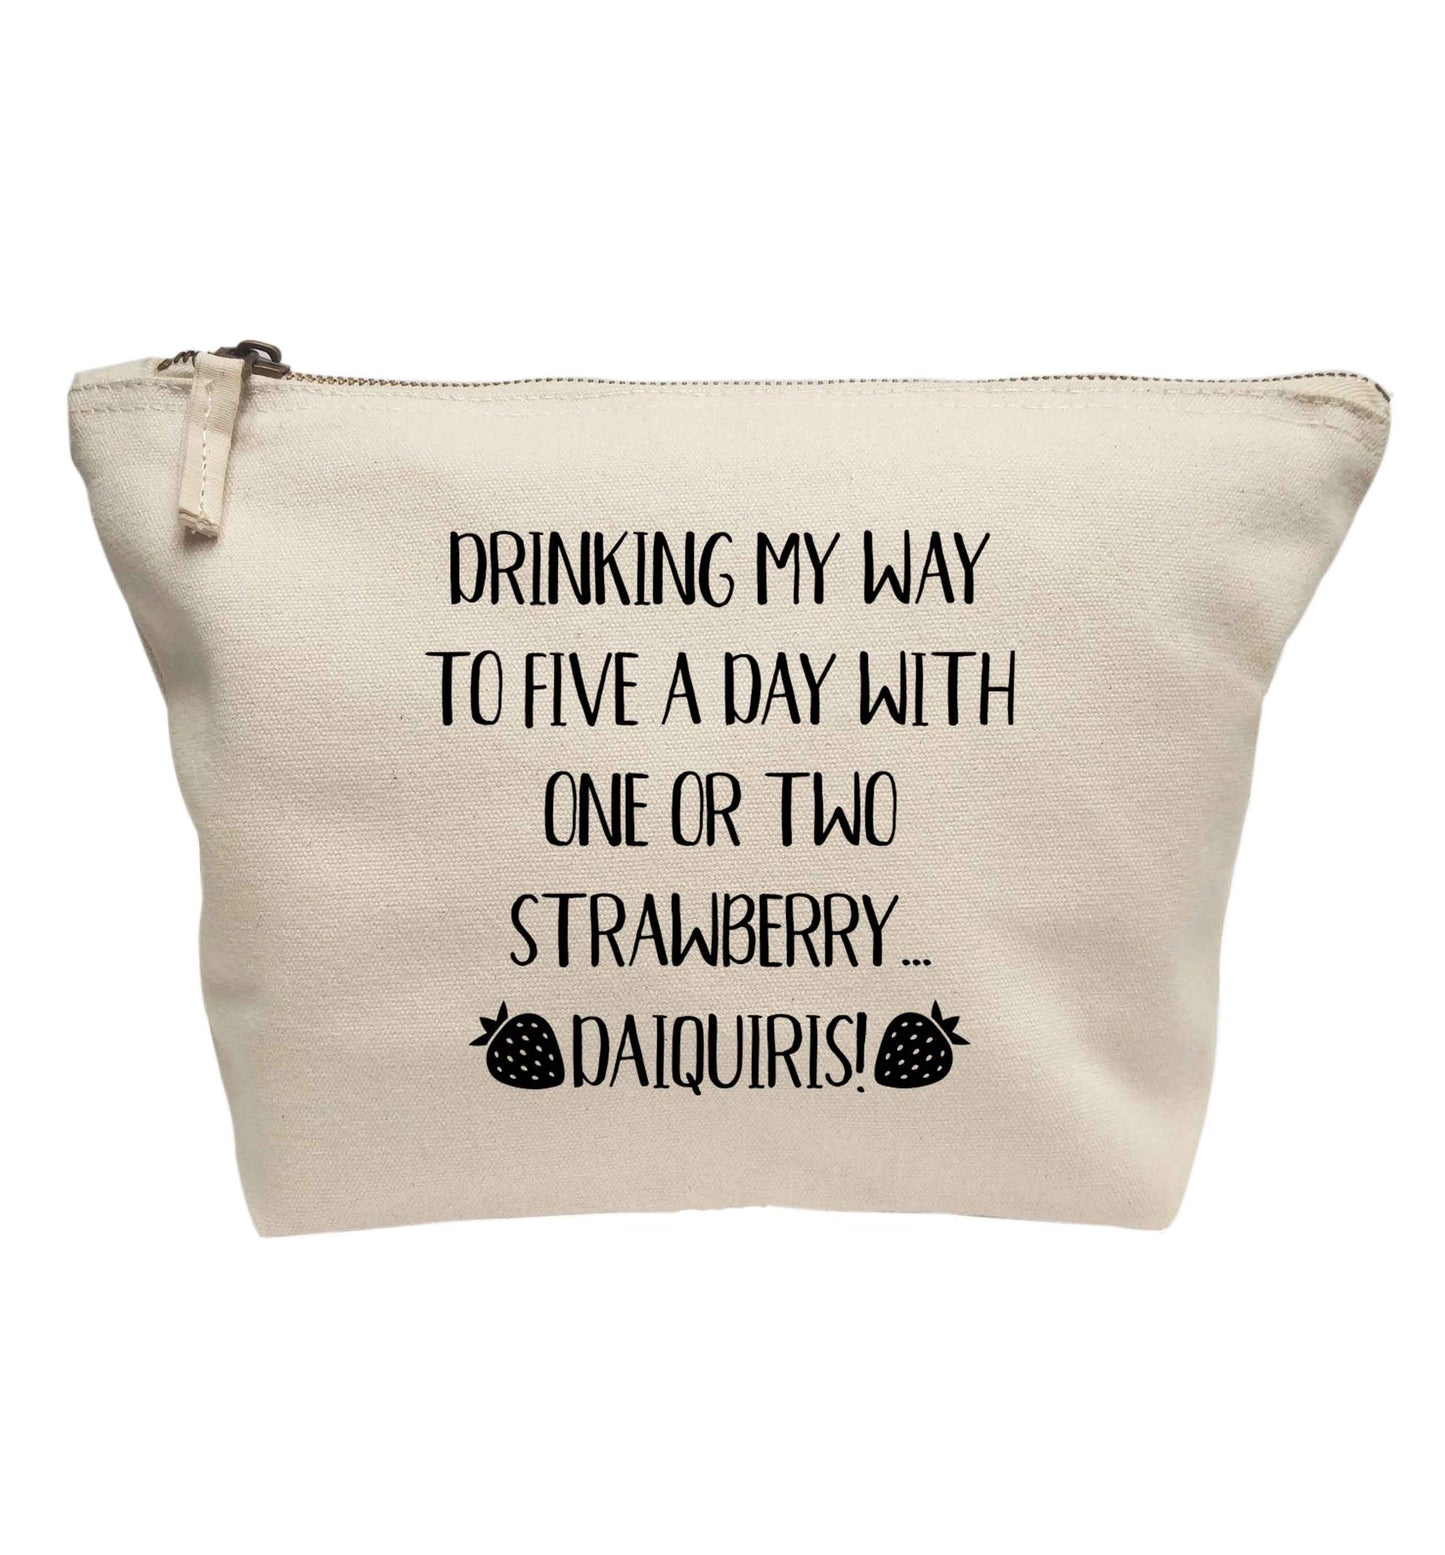 Drinking my way to five a day with one or two straberry daiquiris | makeup / wash bag